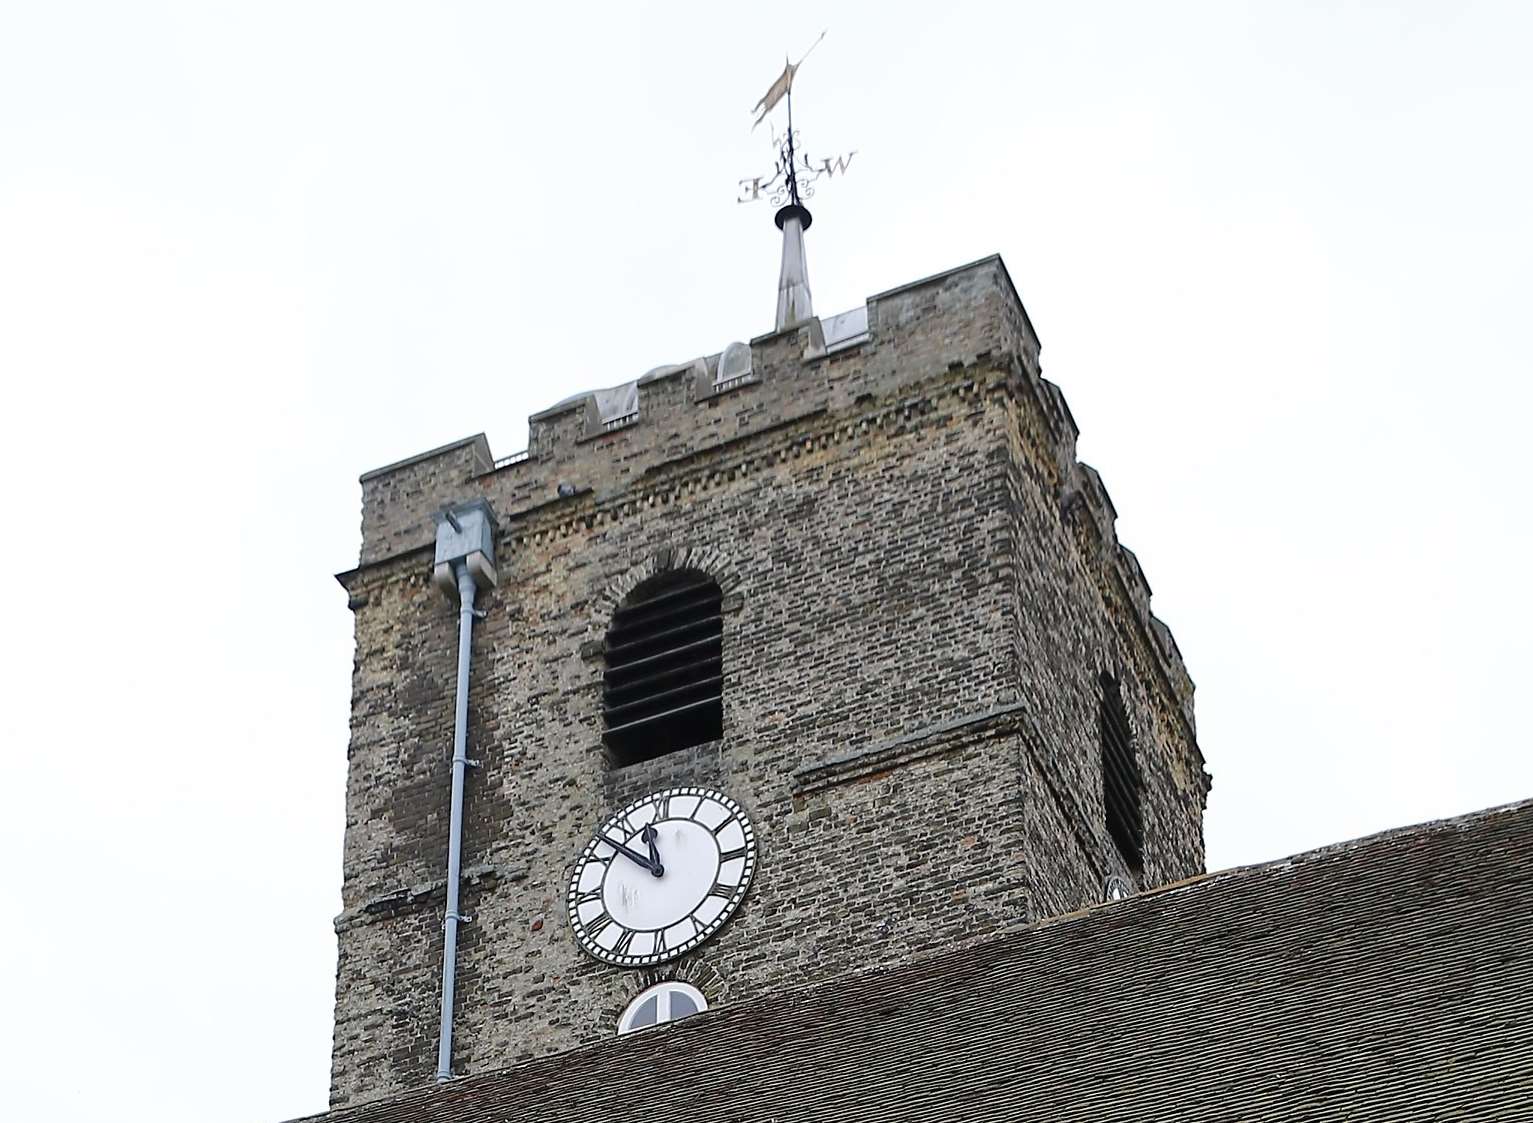 St Peter's church clock could be stopped from chiming at night